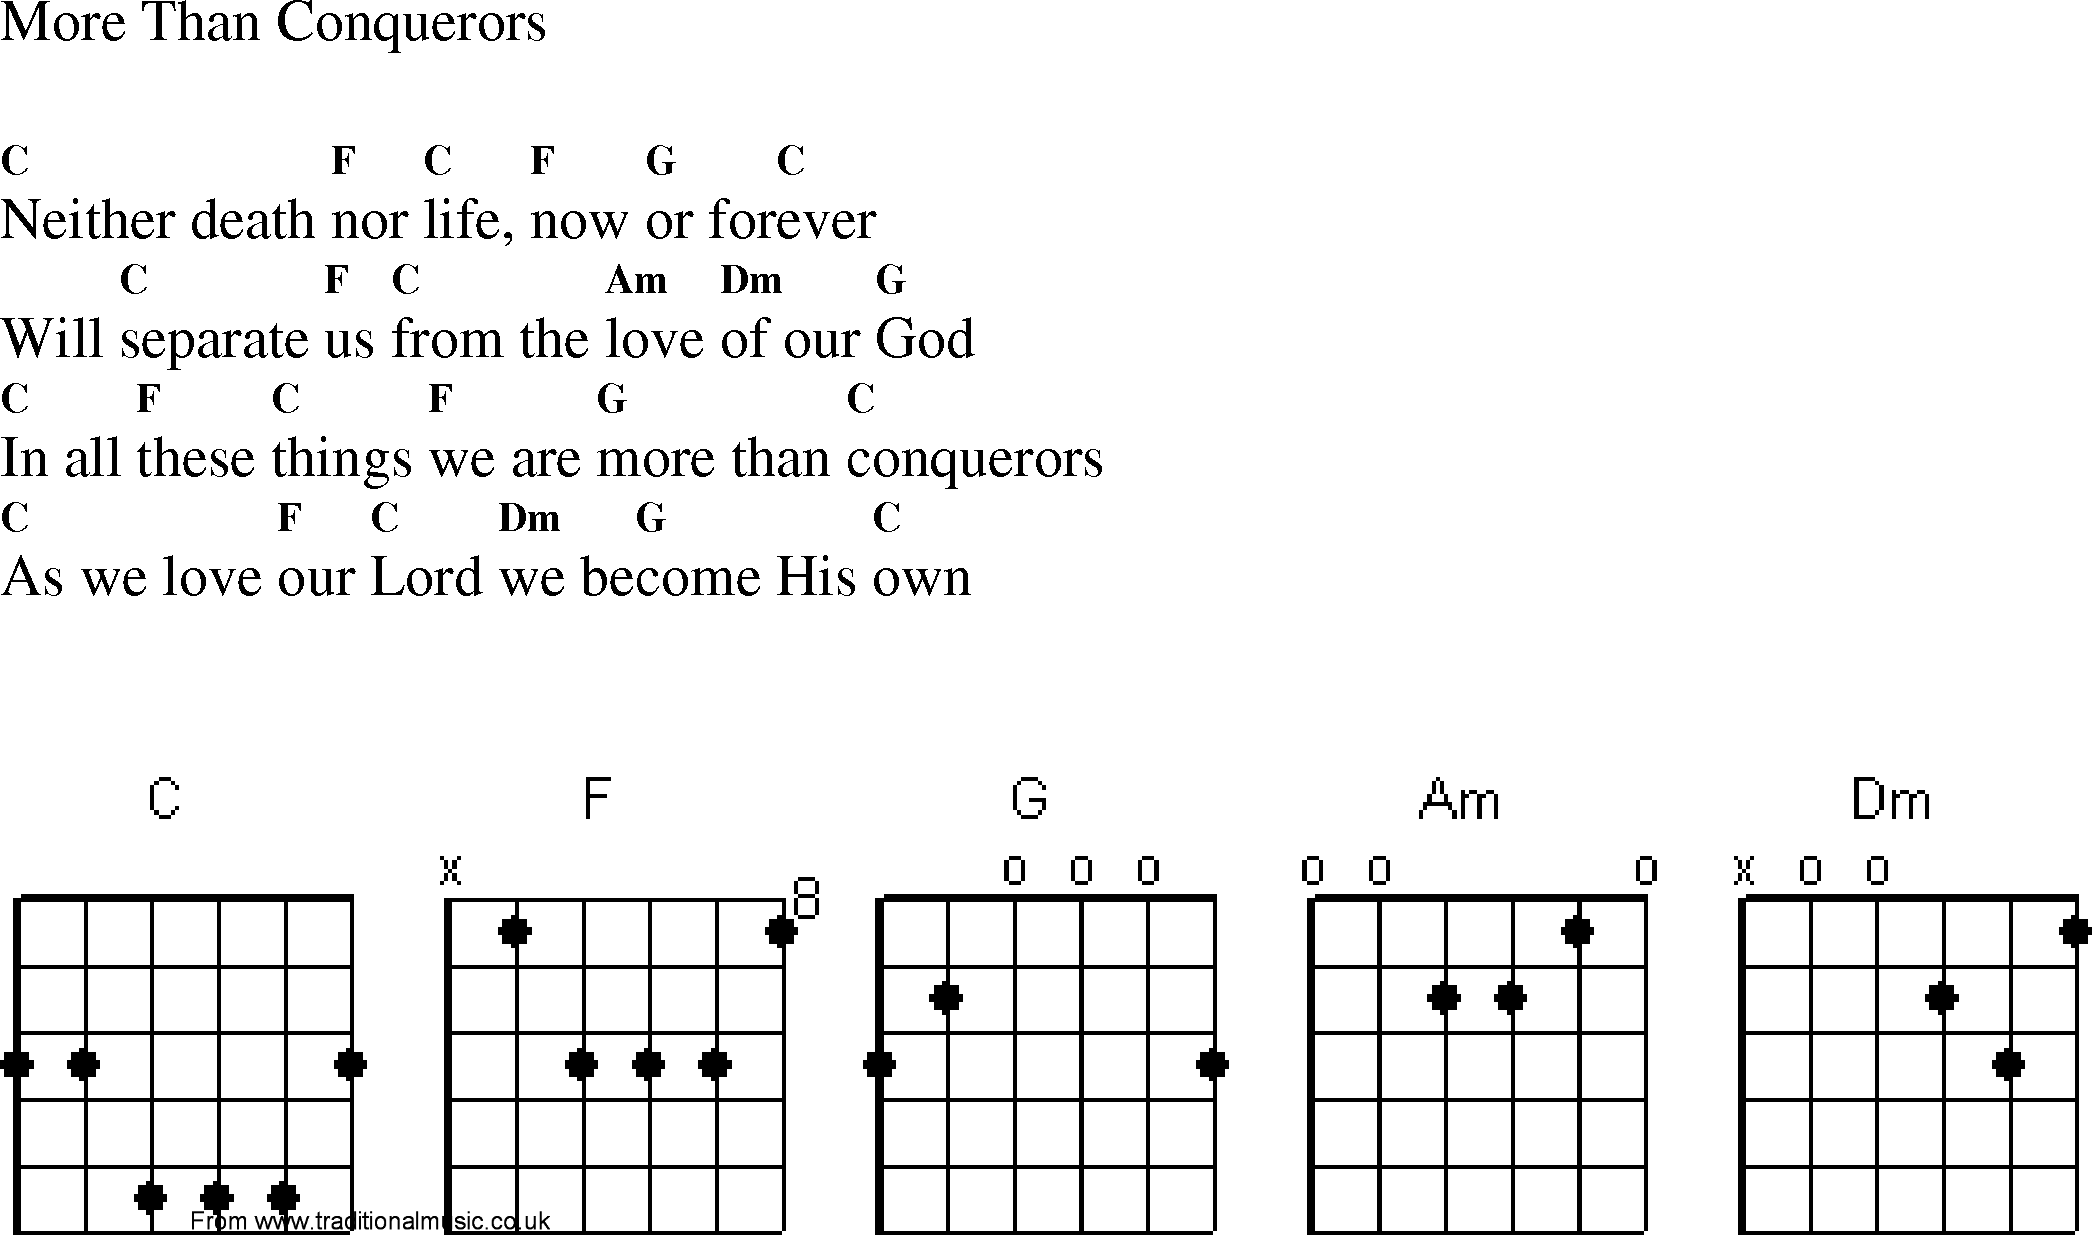 Gospel Song: more_than_conquerors, lyrics and chords.